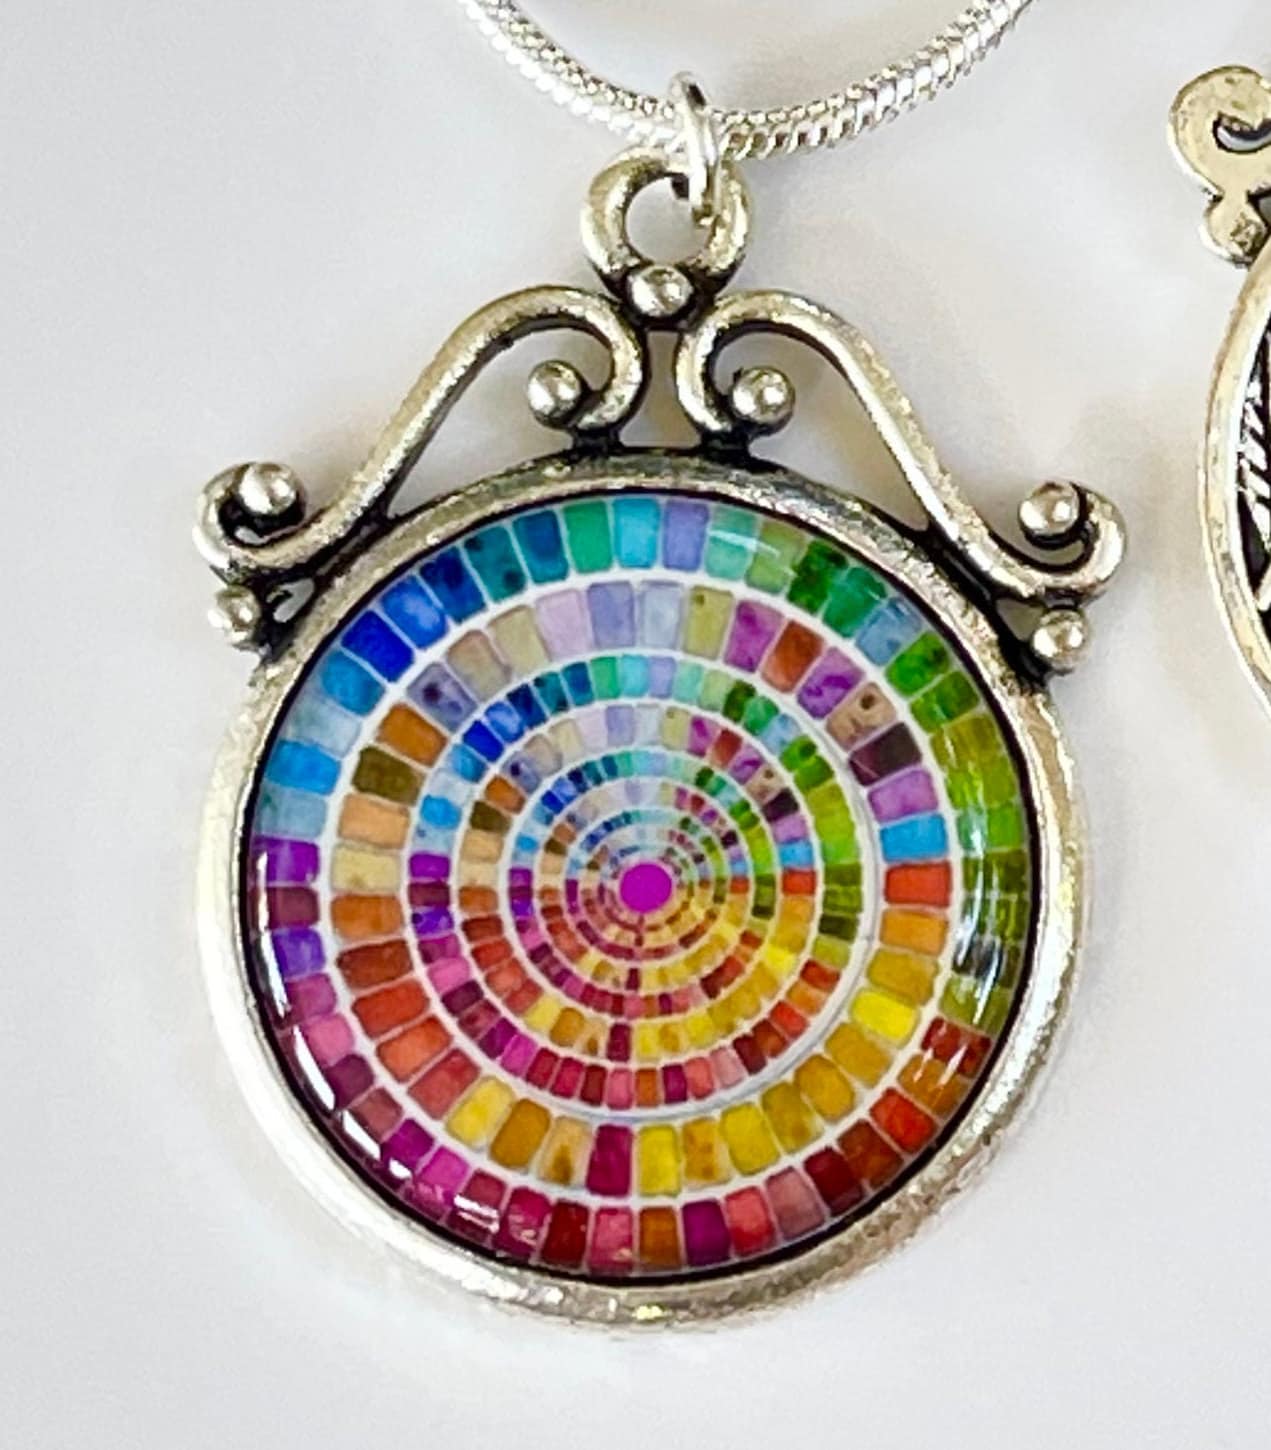 Watercolor Palette Necklace Makes A Great Gift for Artist 14 Link Chain